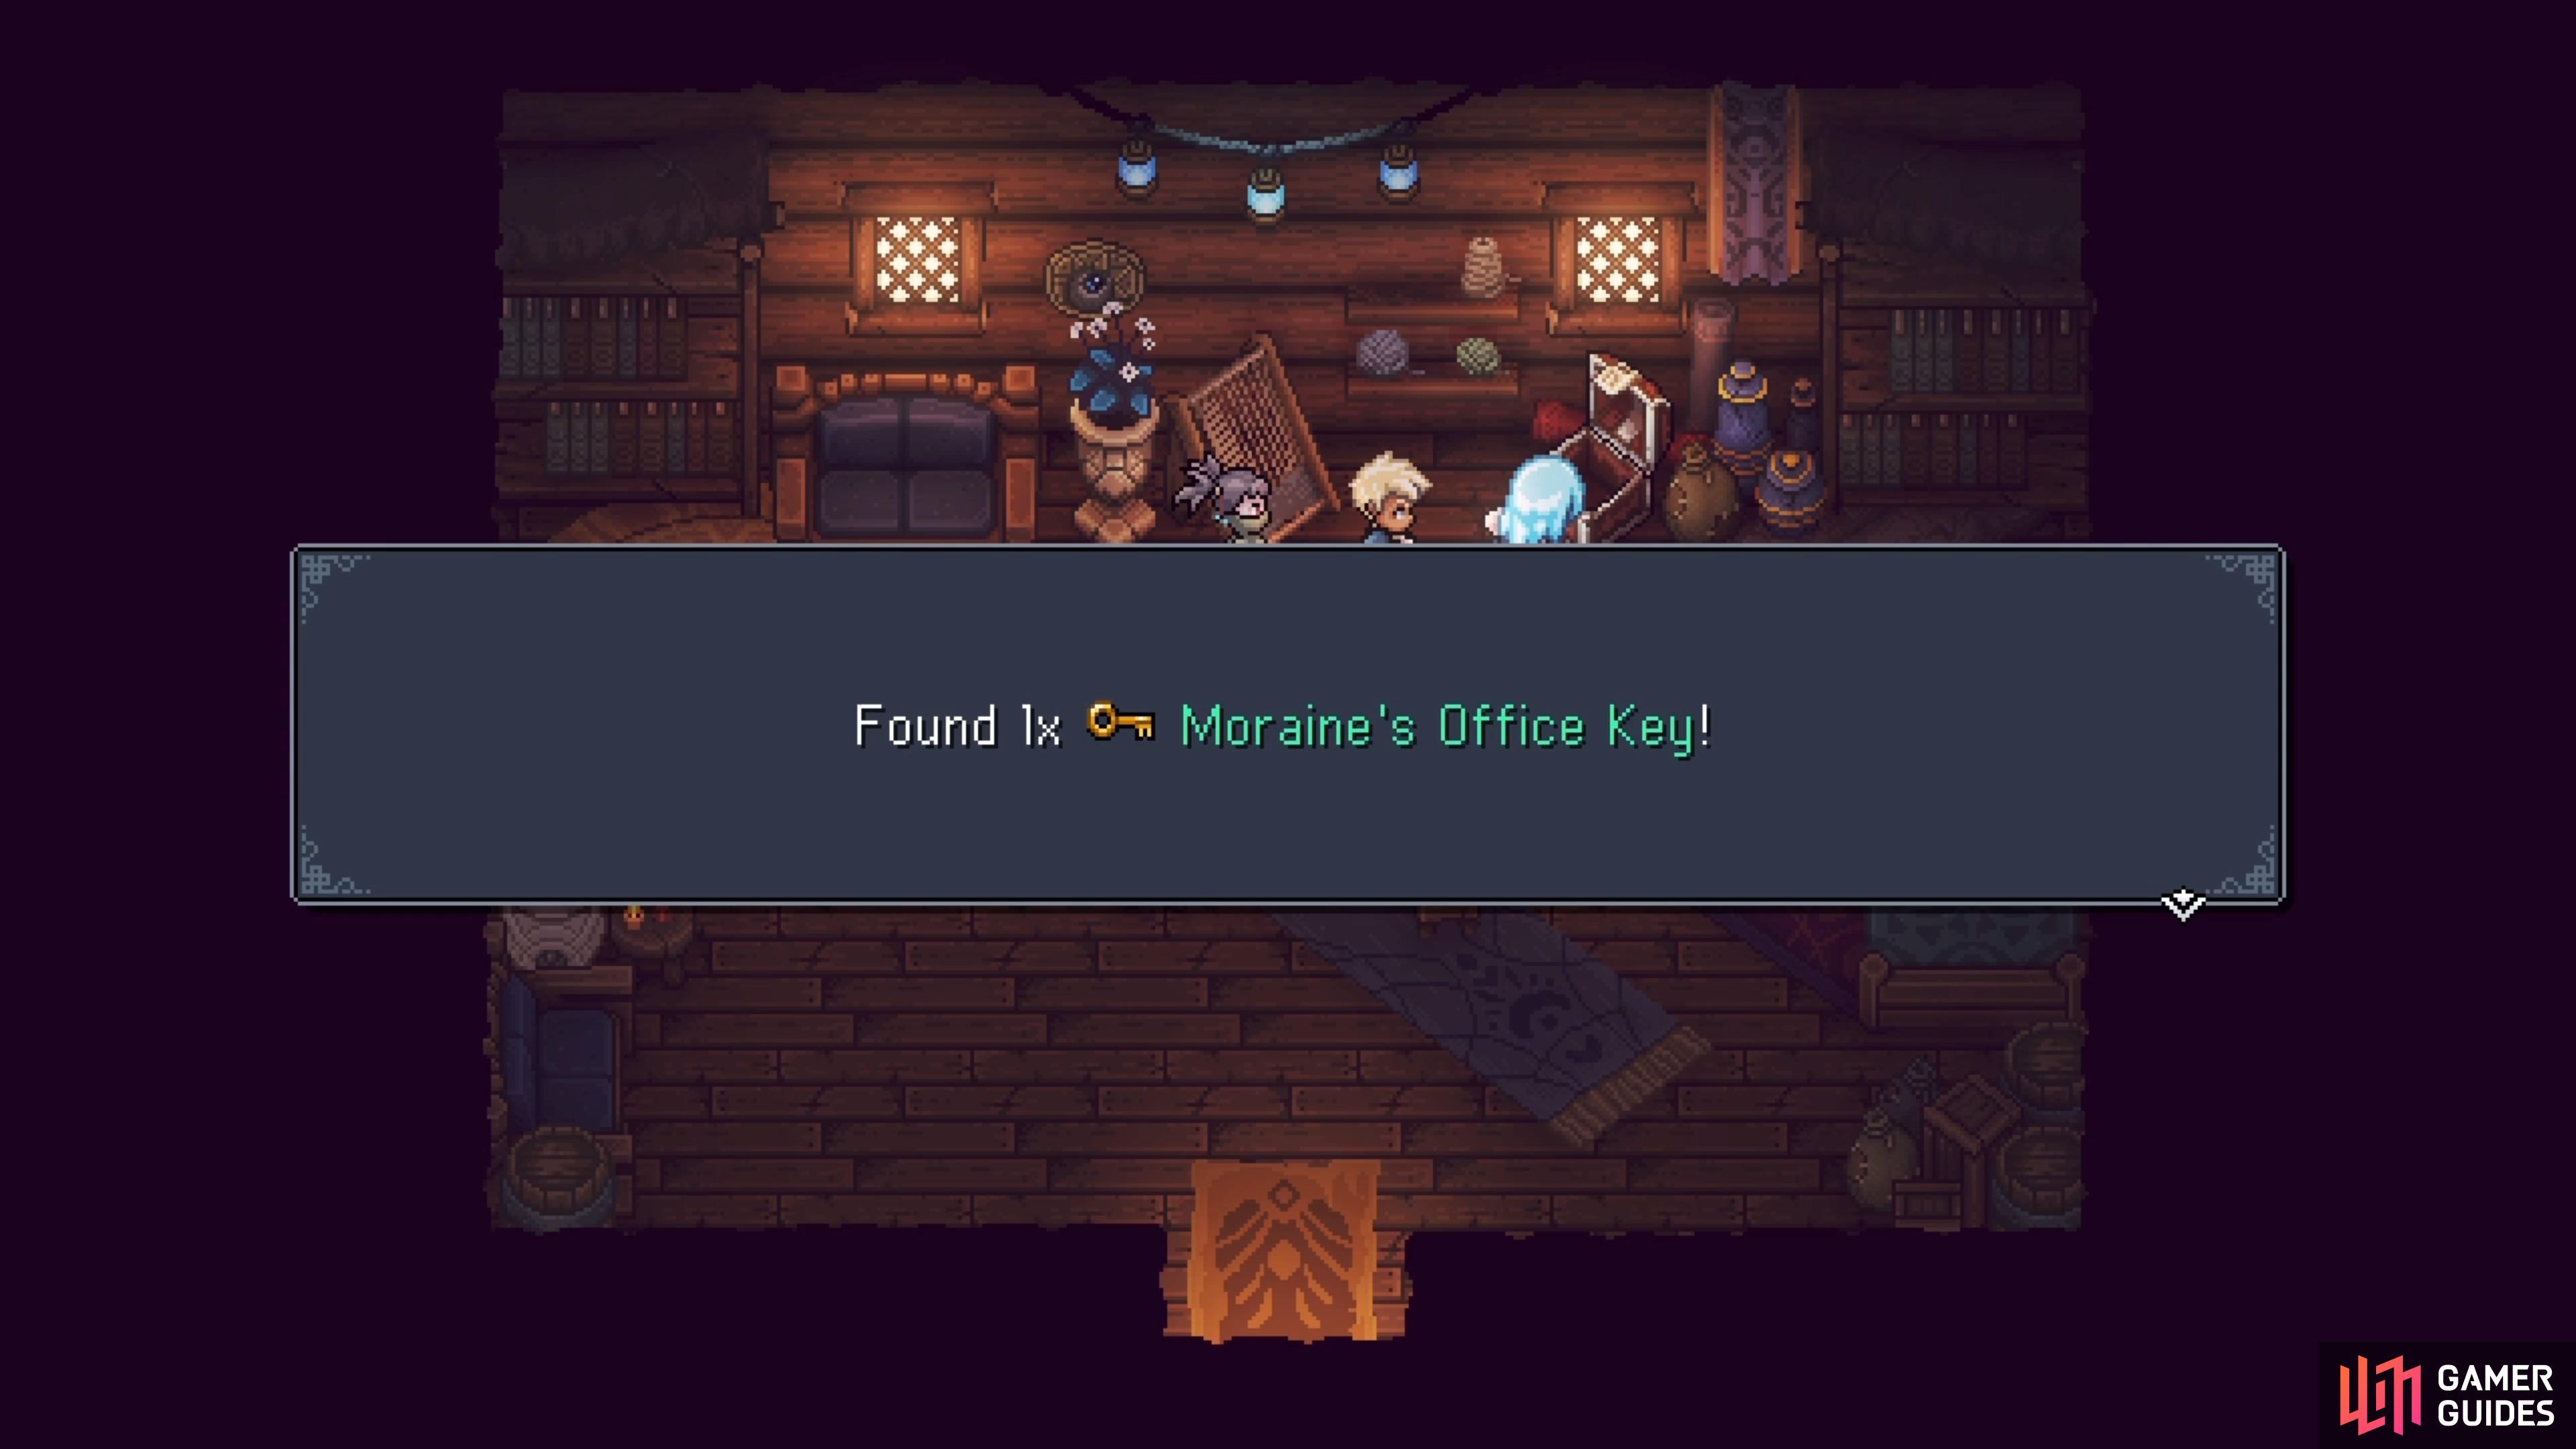 Wait until Moraine's house is built in Mirth, then go inside to loot his Office Key.